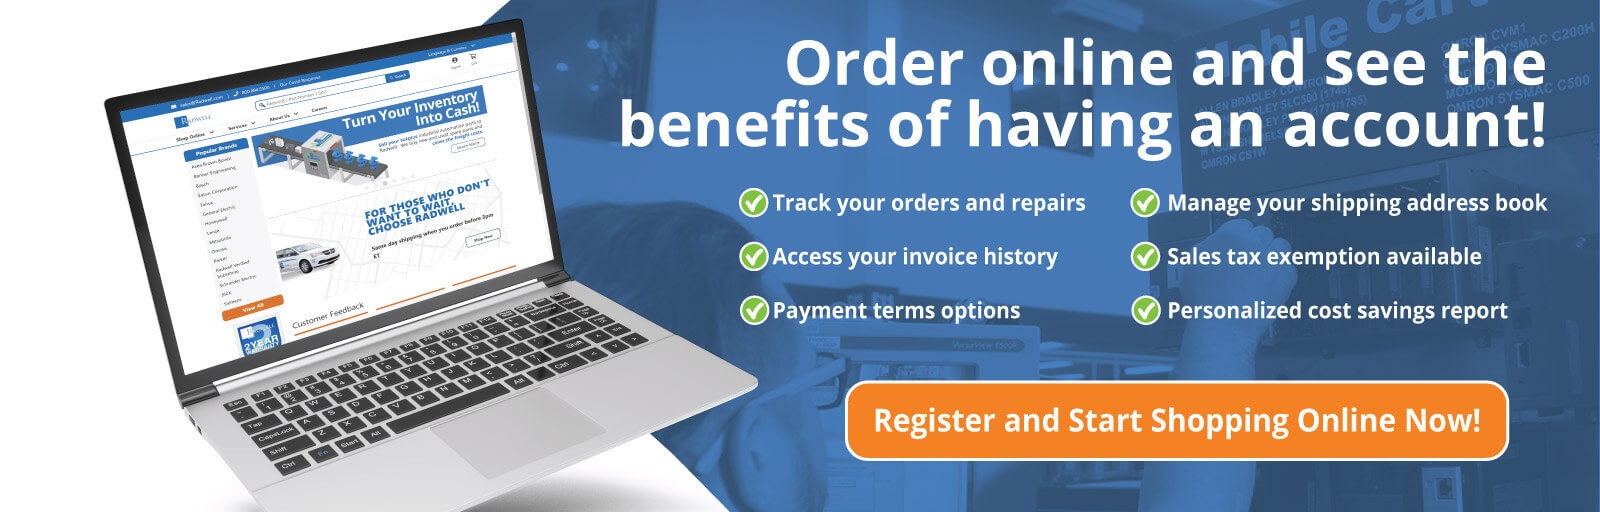 Order online and see the benefits of having an account!